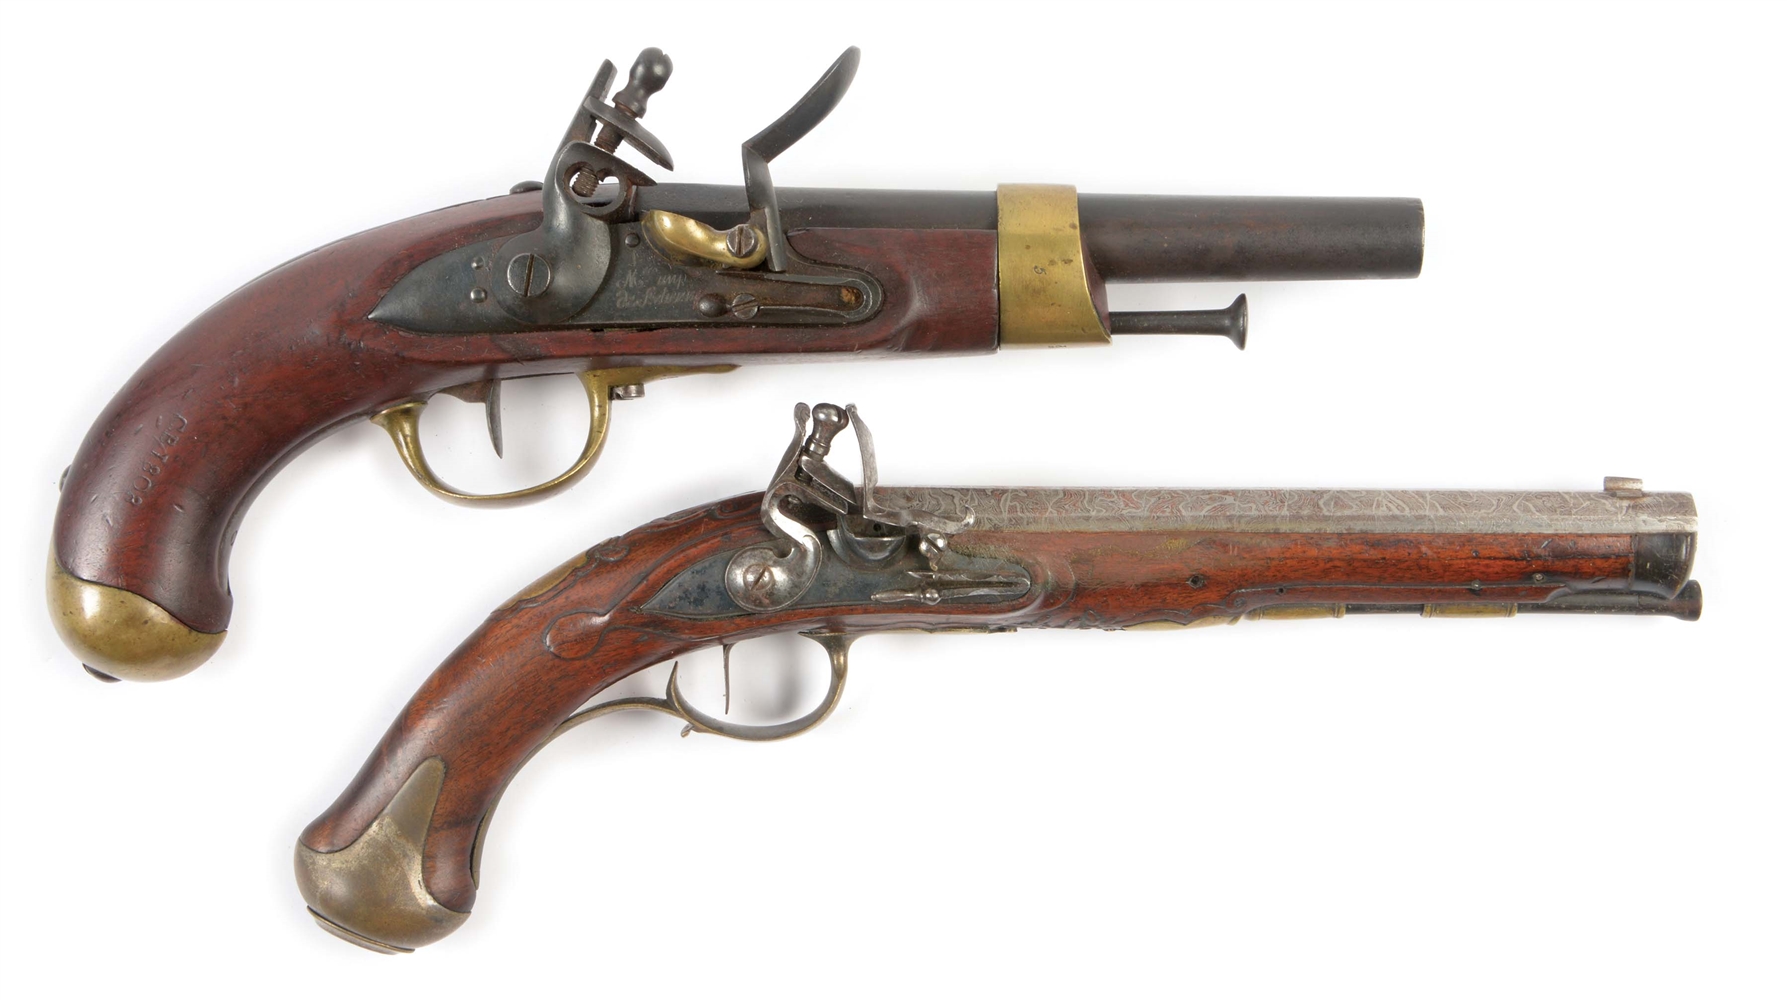 (A) LOT OF TWO: COLLECTORS LOT OF SINGLE SHOT FLINTLOCK PISTOLS, ONE A FRENCH MODEL 1813, THE OTHER A GOOD QUALITY GERMAN 18TH CENTURY PISTOL WITH BEAUTIFUL DAMASCUS BARREL.